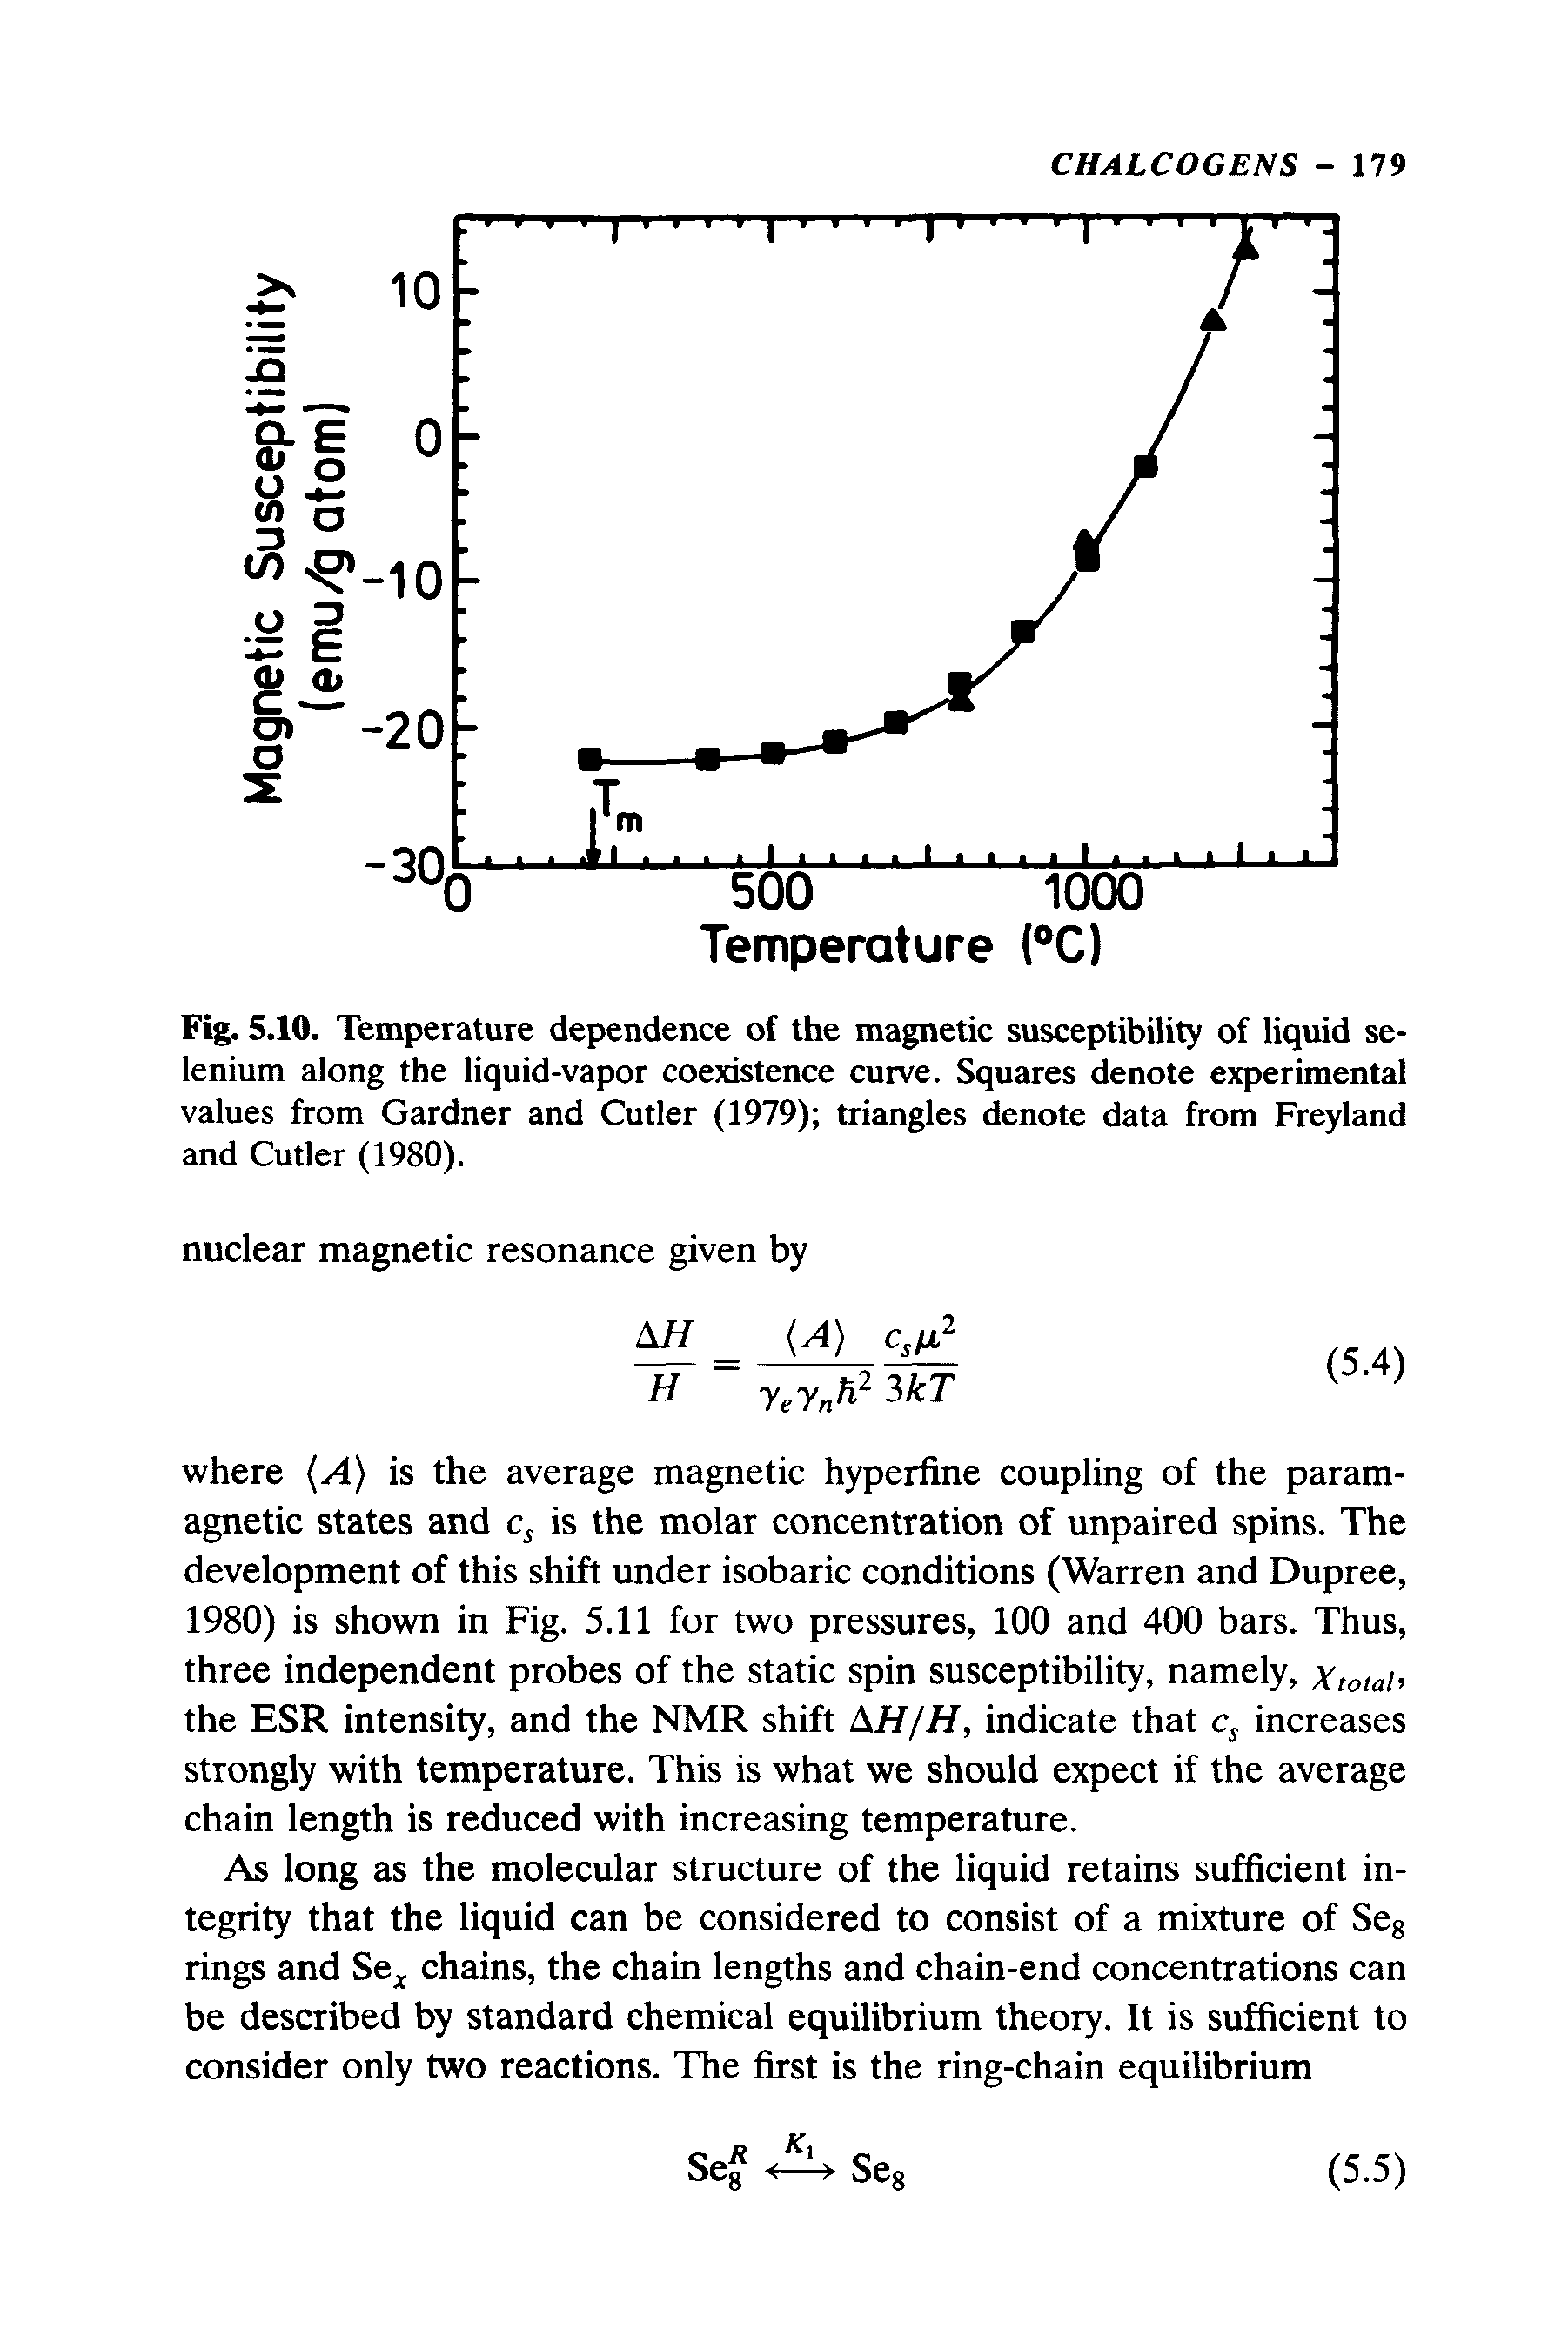 Fig. 5.10. Temperature dependence of the magnetic susceptibility of liquid selenium along the liquid-vapor coexistence curve. Squares denote experimental values from Gardner and Cutler (1979) triangles denote data from Freyland and Cutler (1980).